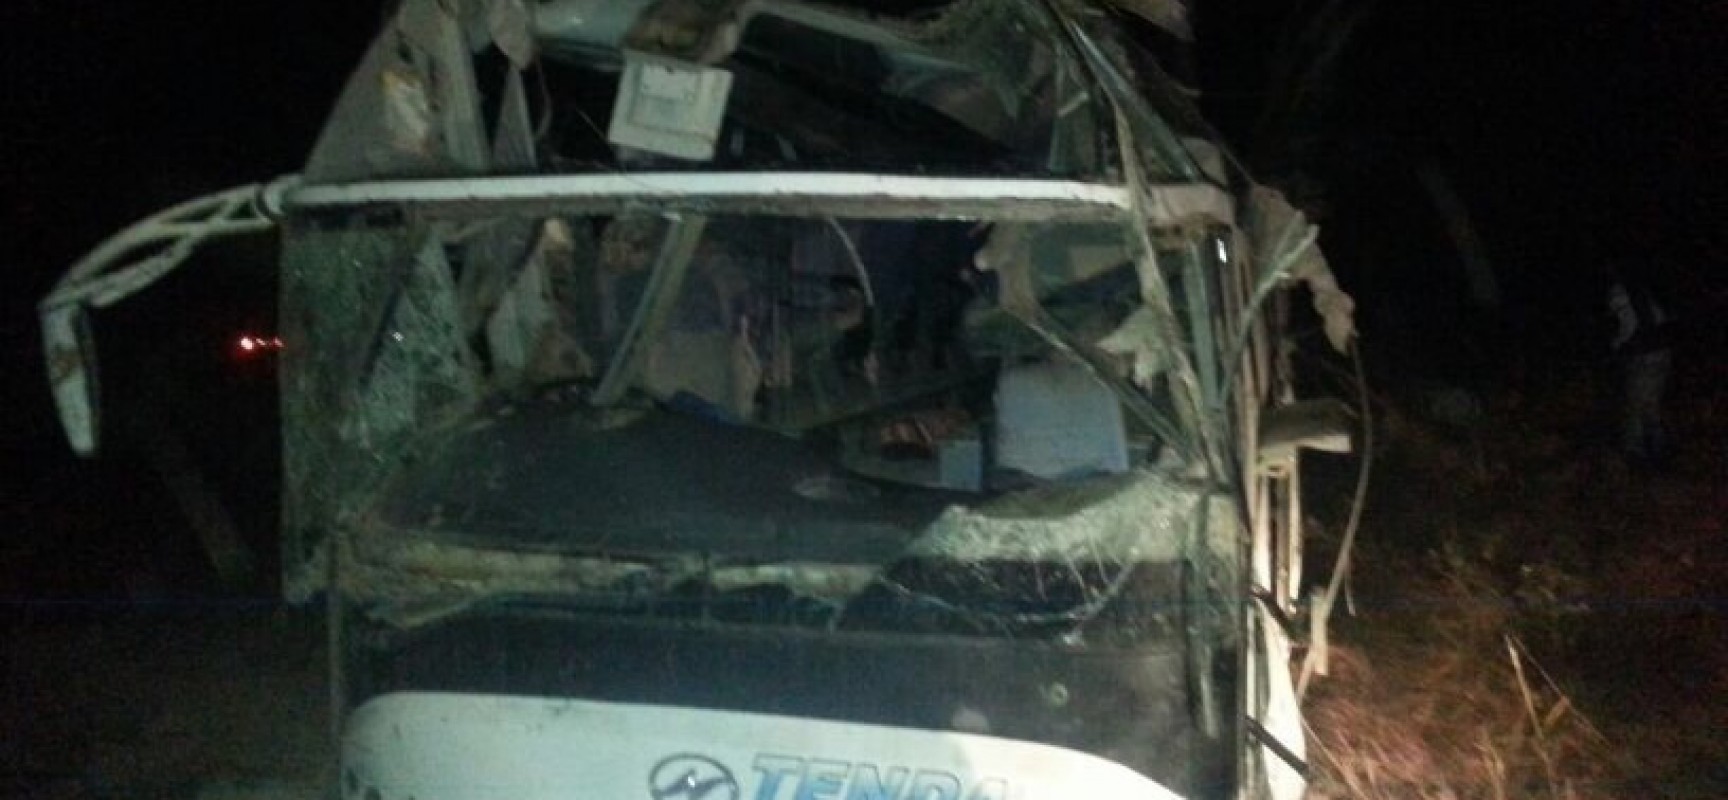 2 Die as speeding ‘Tenda’  Bus, loses control and crashes into trees